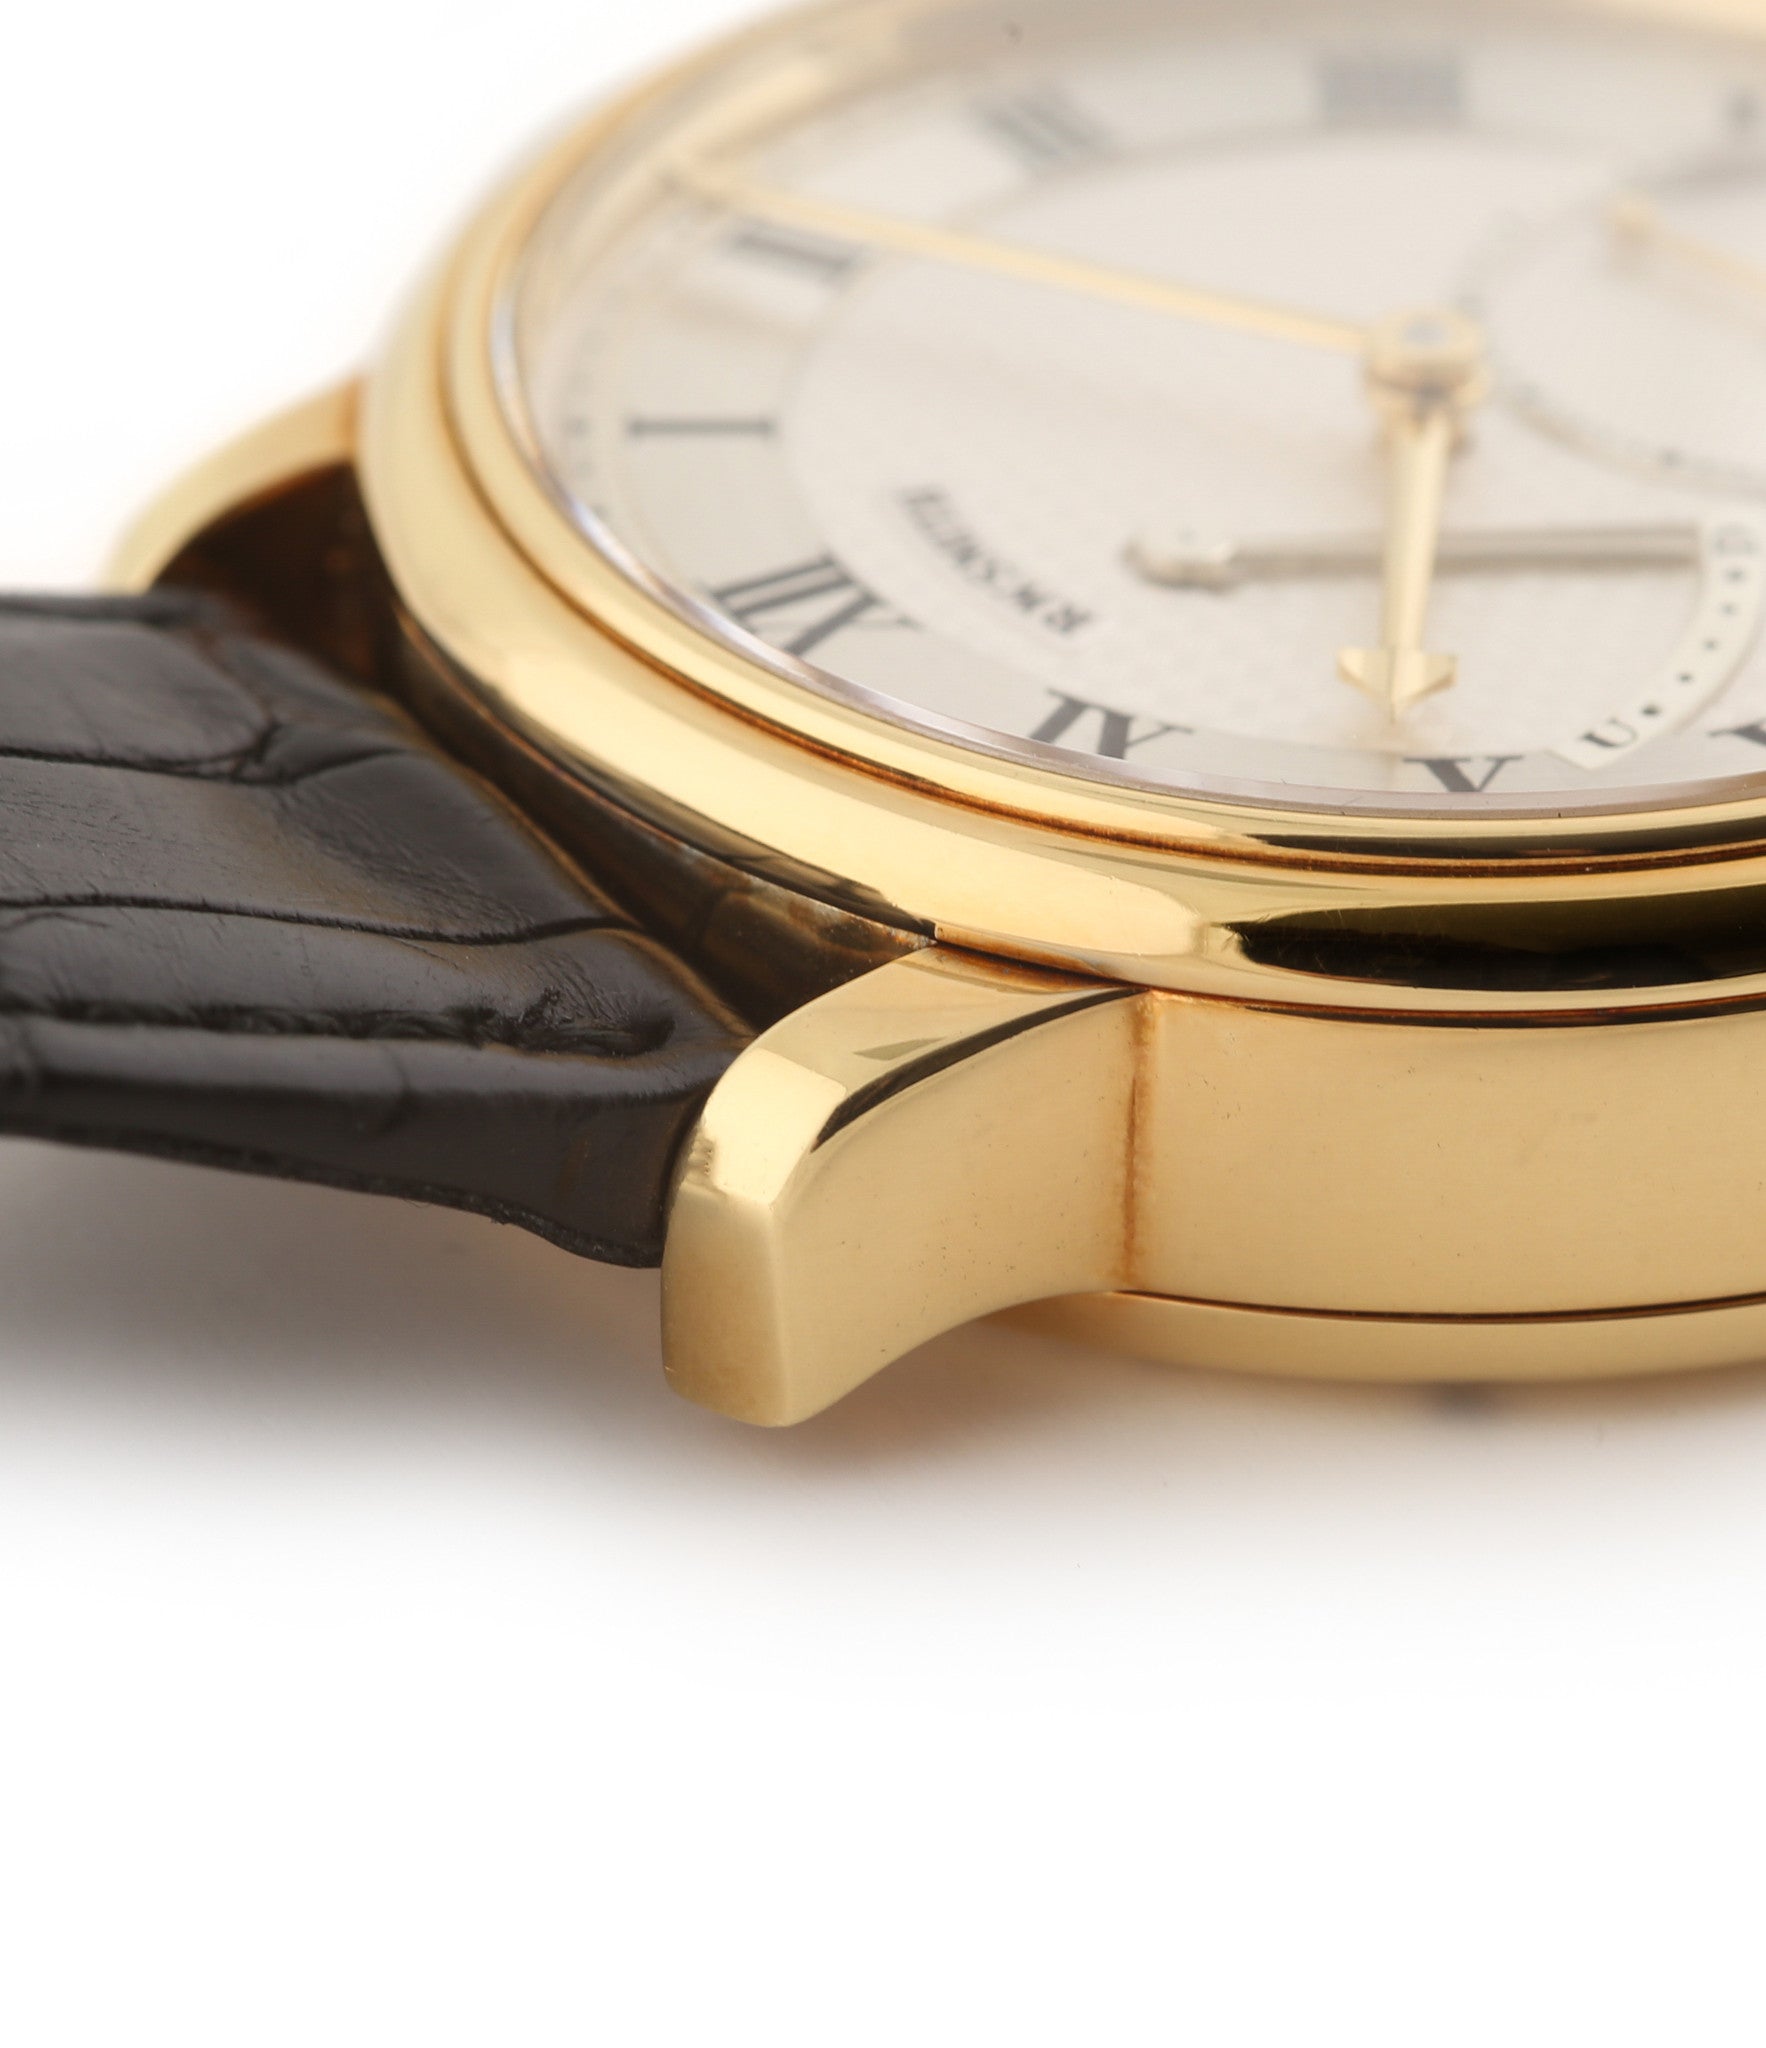 Buy Roger W. Smith's first Series 2 watch online in yellow gold with hand-made manual-winding movement from independent watchmaker at WATCH XCHANGE London straight line lugs